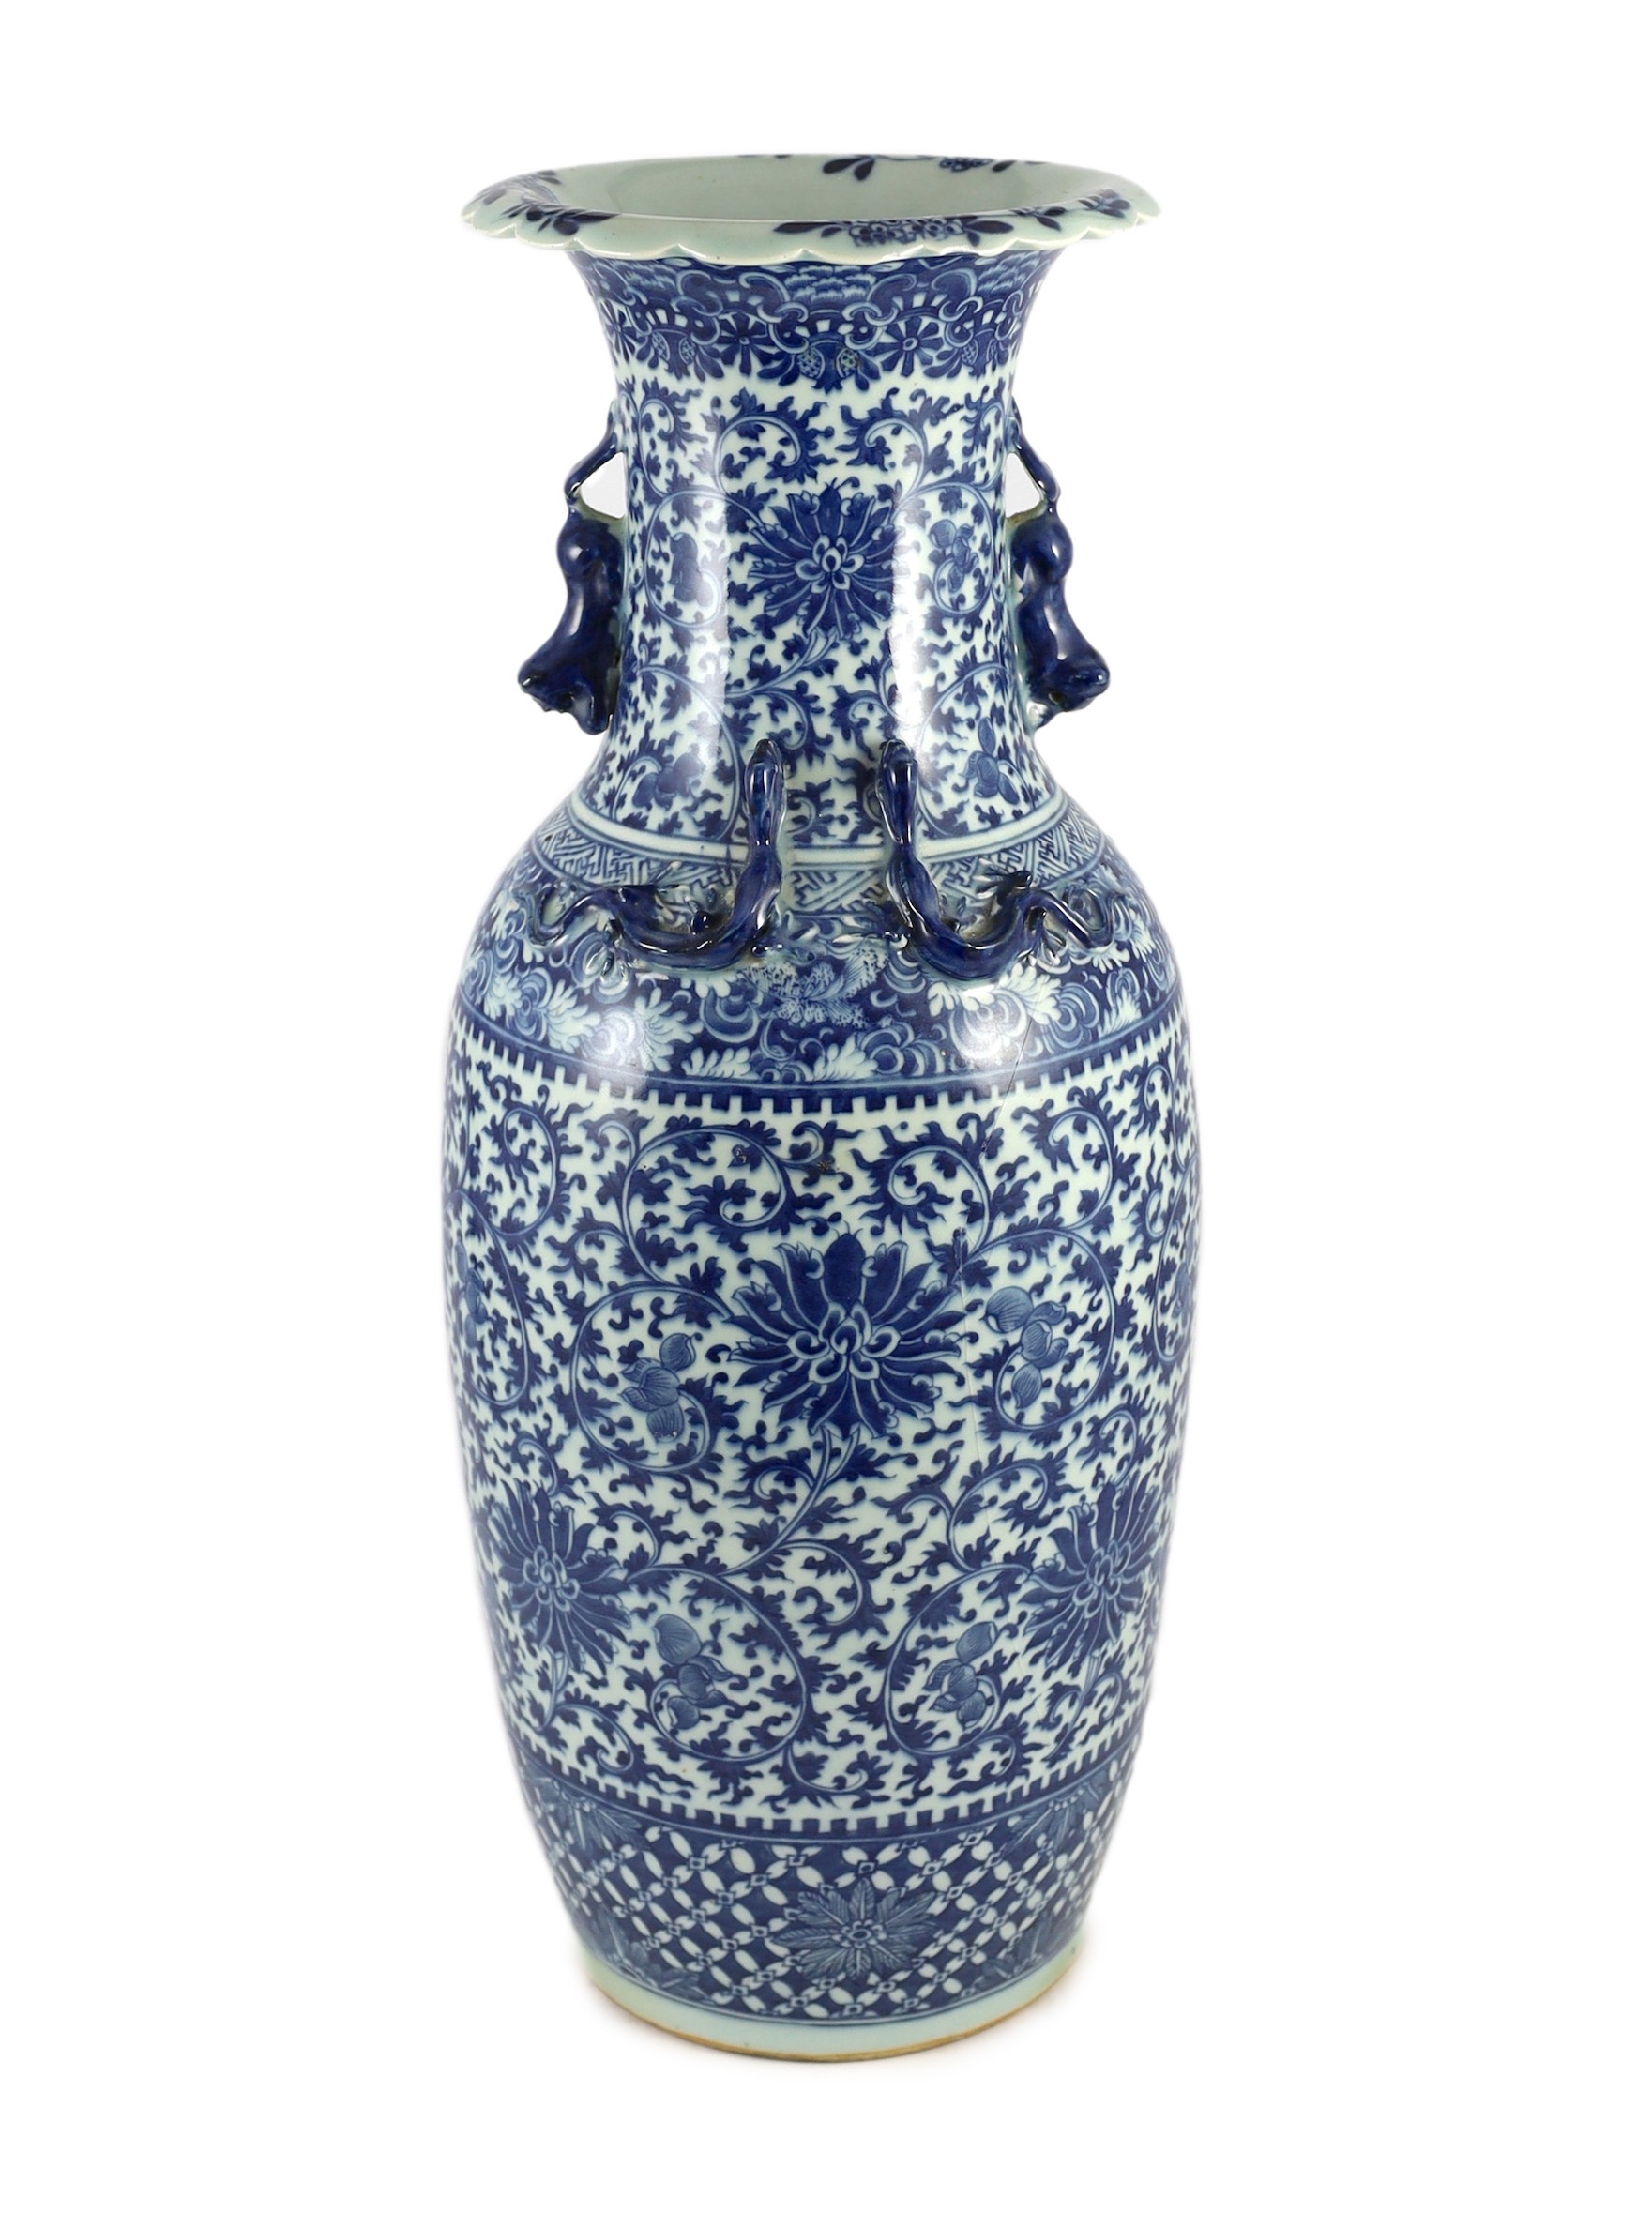 A large Chinese blue and white ‘lotus’ vase, 19th century, 59cm high, damaged